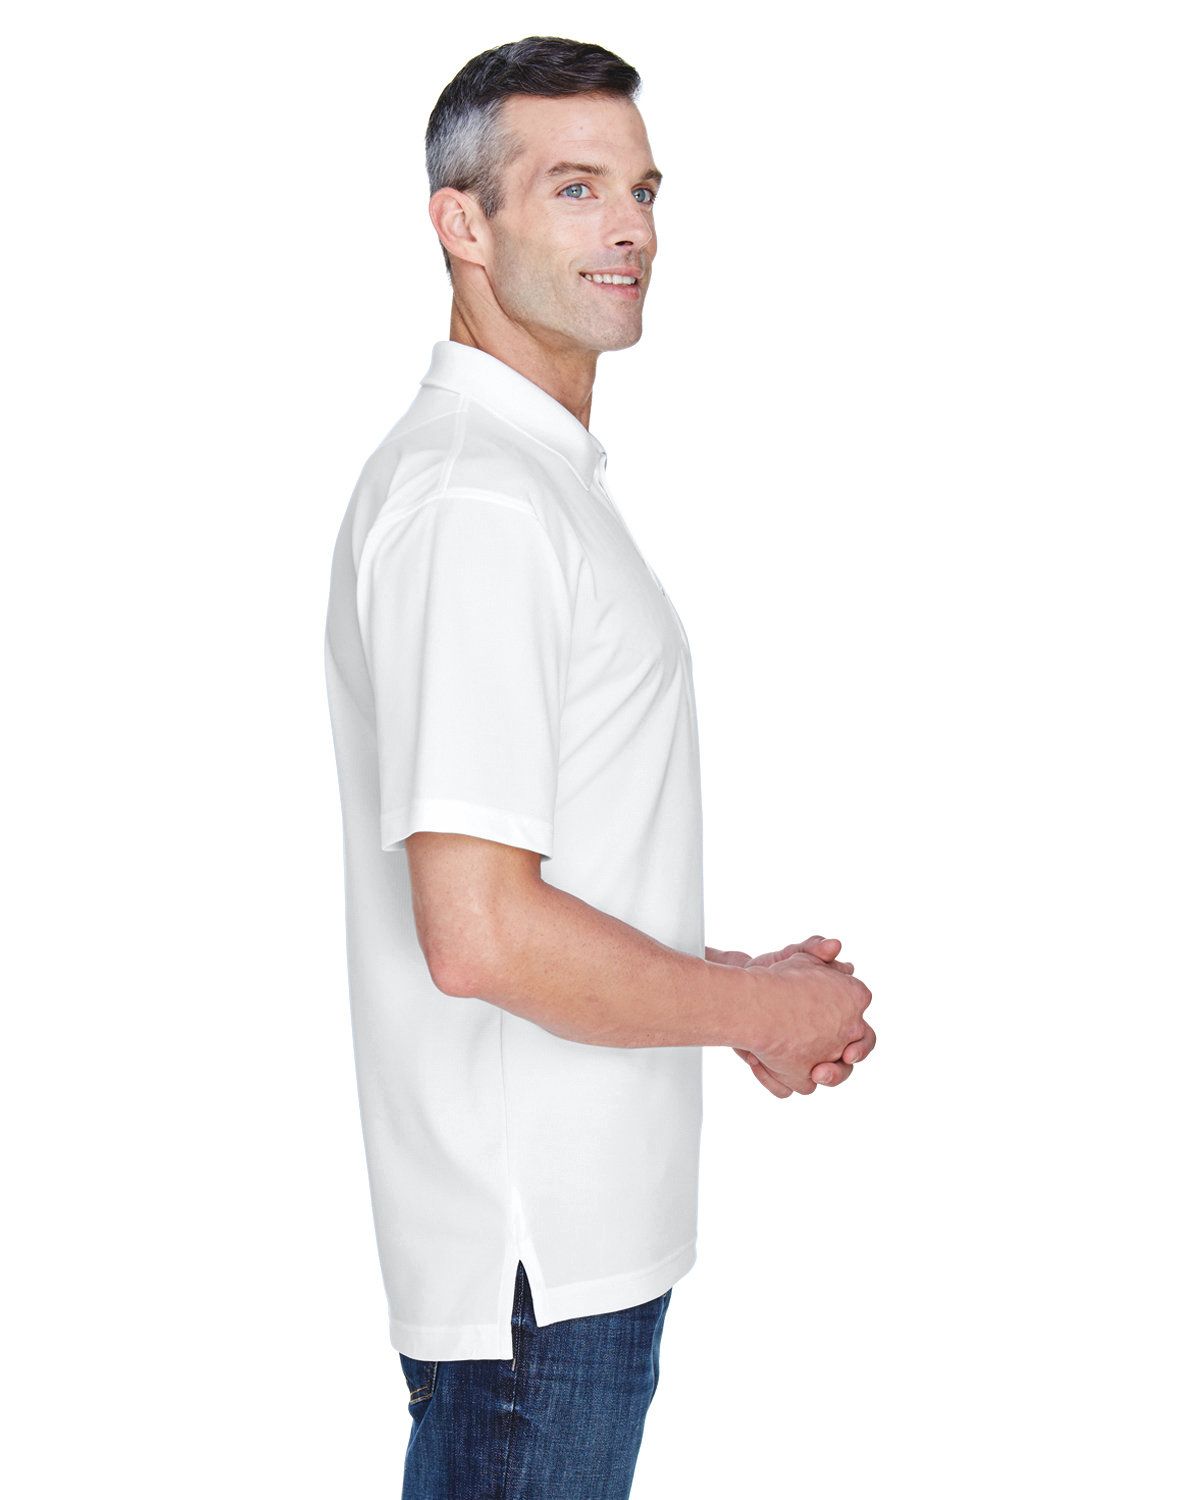 'UltraClub 8445 Men's Cool & Dry Stain-Release Performance Polo'